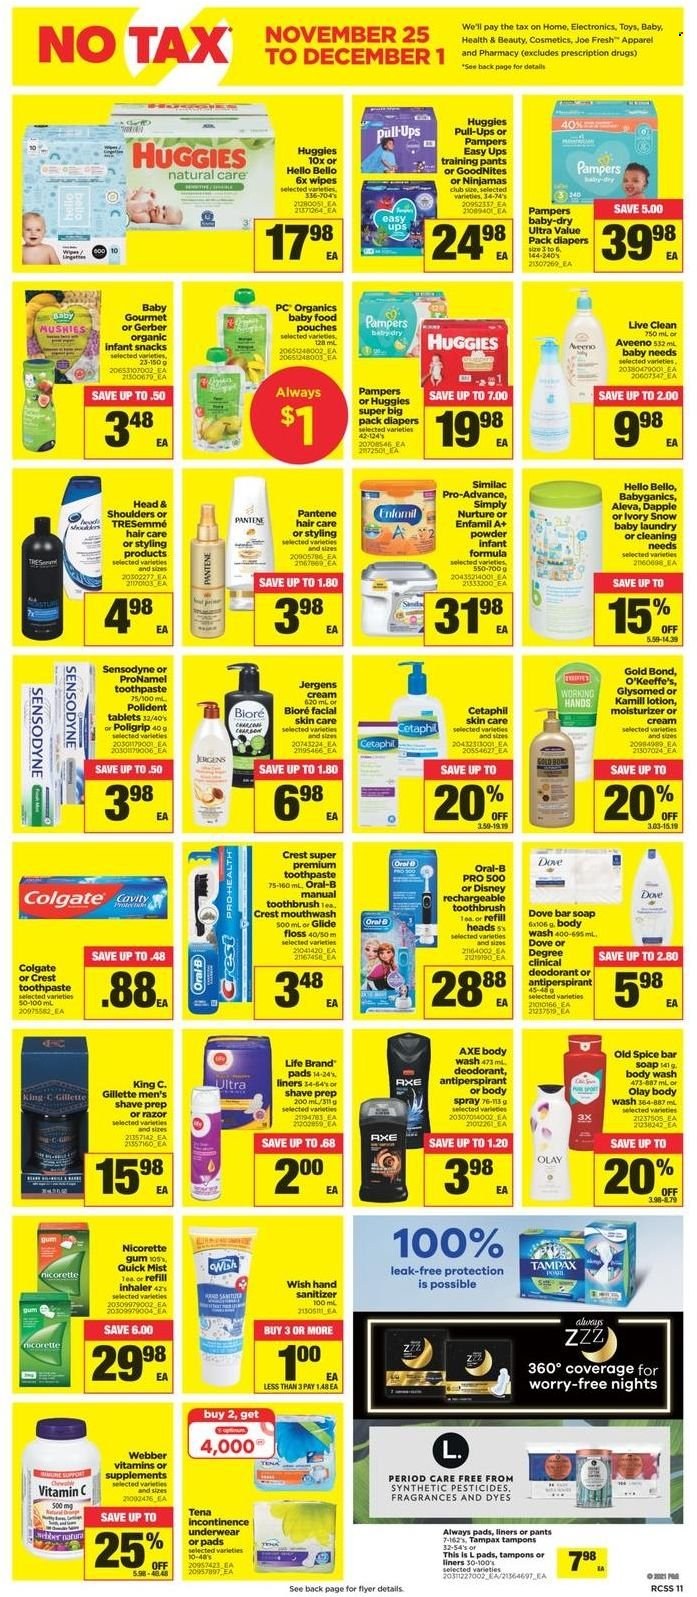 thumbnail - Real Canadian Superstore Flyer - November 25, 2021 - December 01, 2021 - Sales products - snack, Gerber, spice, tea, Enfamil, Similac, wipes, pants, nappies, baby pants, Aveeno, body wash, soap bar, soap, toothbrush, toothpaste, mouthwash, Polident, Crest, Always pads, incontinence underwear, tampons, moisturizer, Olay, Bioré®, TRESemmé, body lotion, body spray, Jergens, anti-perspirant, razor, hand sanitizer, toys, Nicorette, vitamin c, Nicorette Gum, Dove, Colgate, Gillette, Tampax, Head & Shoulders, Huggies, Pampers, Pantene, Old Spice, Oral-B, Sensodyne, deodorant. Page 11.